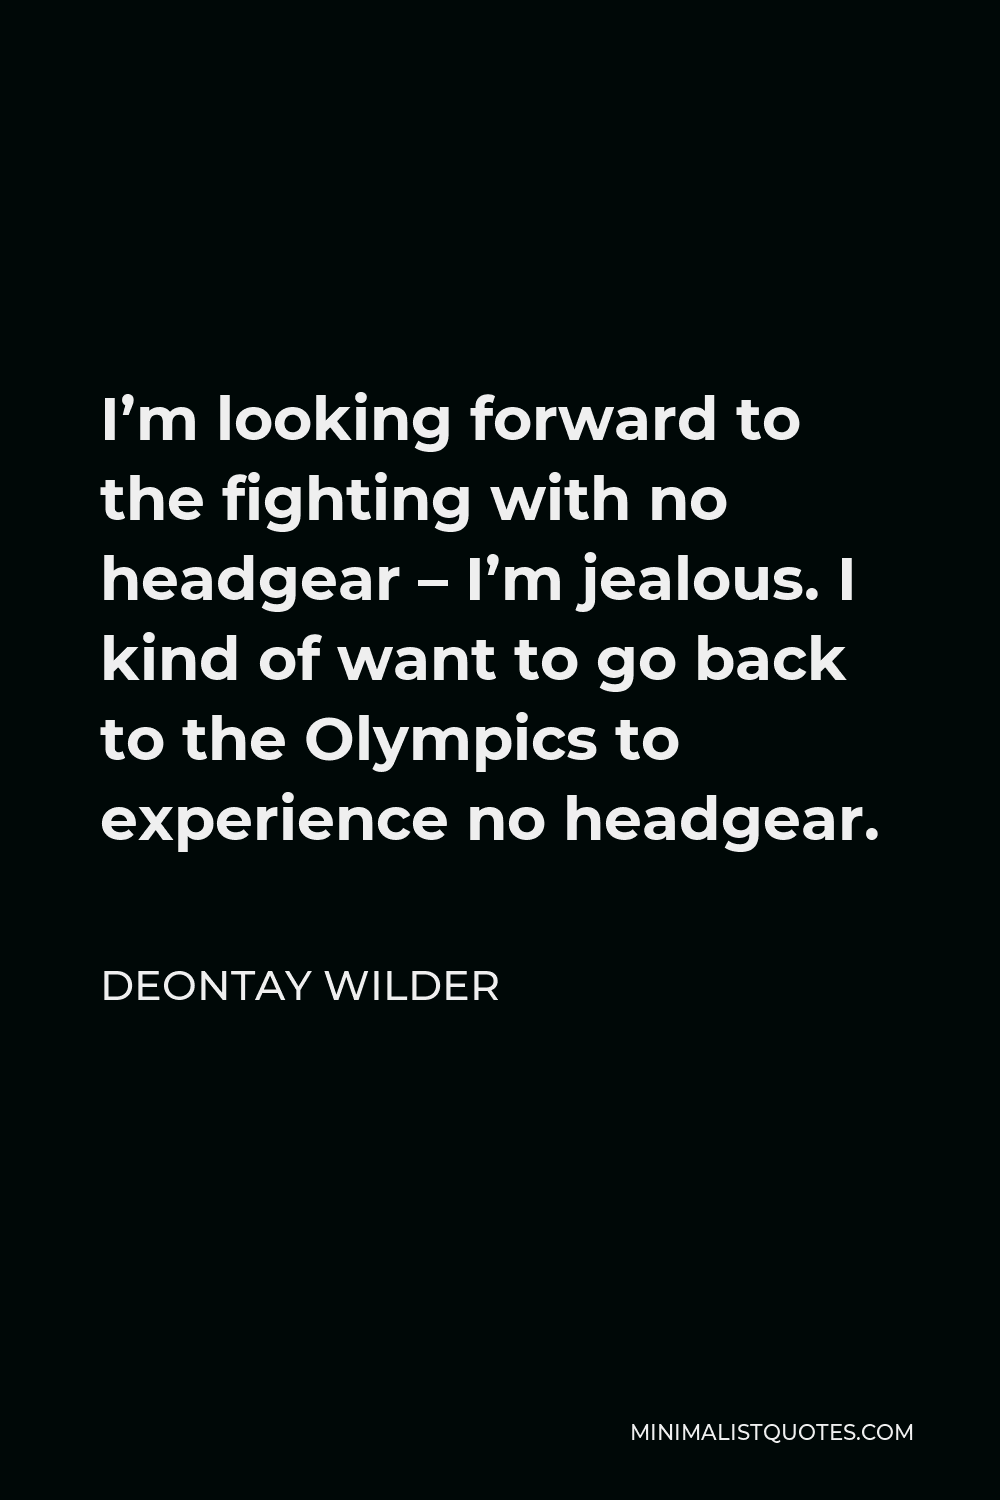 Deontay Wilder Quote - I’m looking forward to the fighting with no headgear – I’m jealous. I kind of want to go back to the Olympics to experience no headgear.